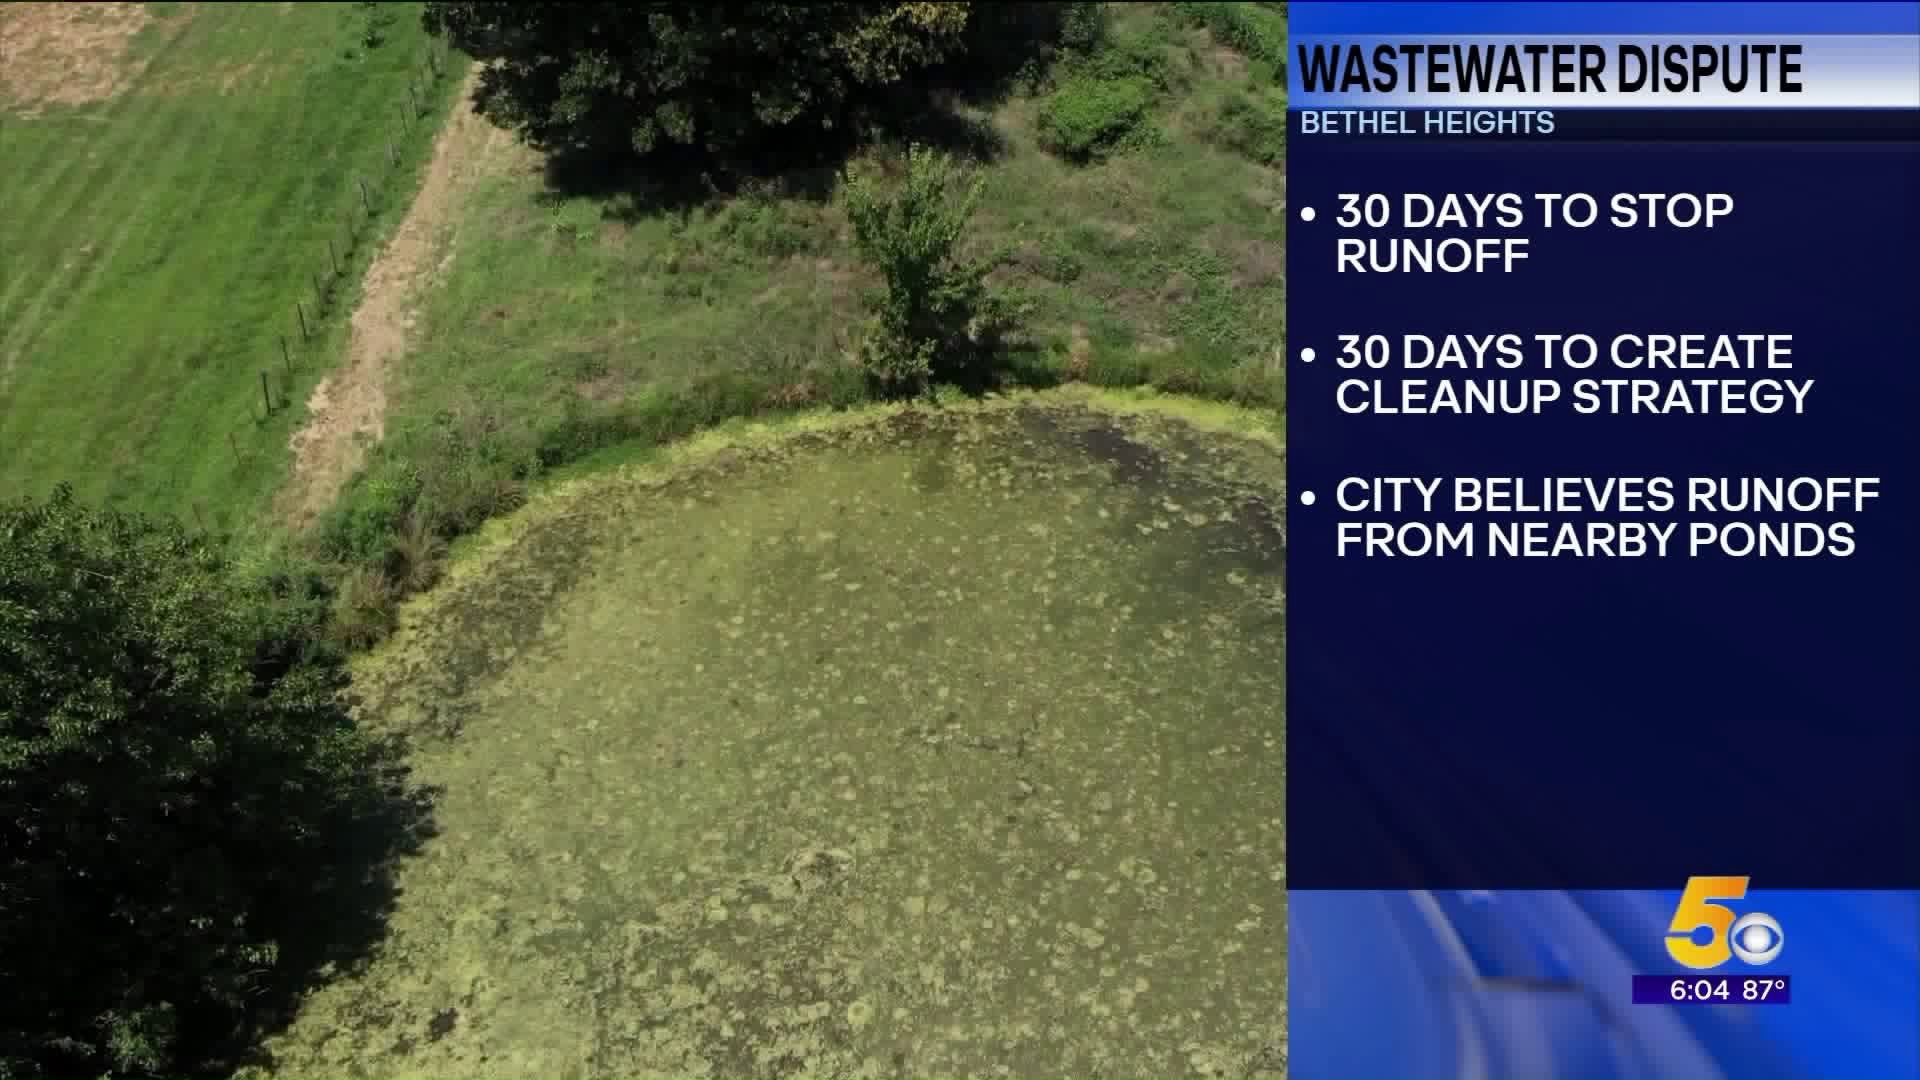 Bethel Heights Officials Face Criminal Charges If Wastewater Issue Left Unsolved